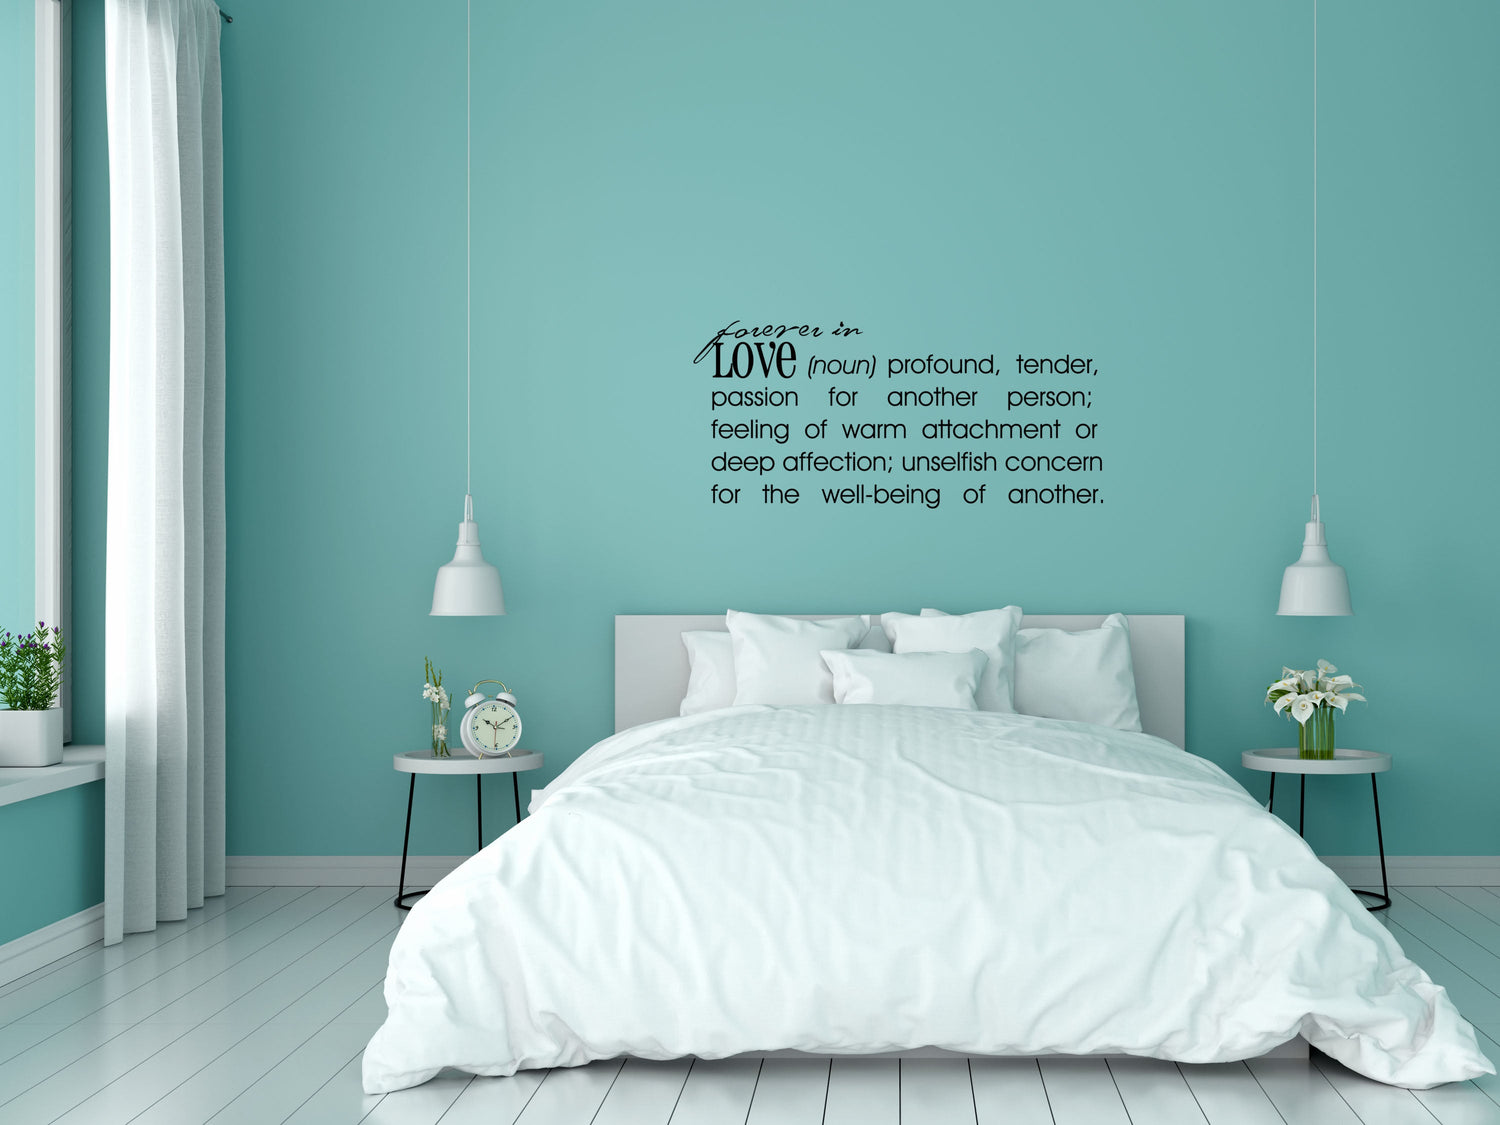 Forever In Love - Inspirational Wall Decals Vinyl Wall Decal Inspirational Wall Signs 